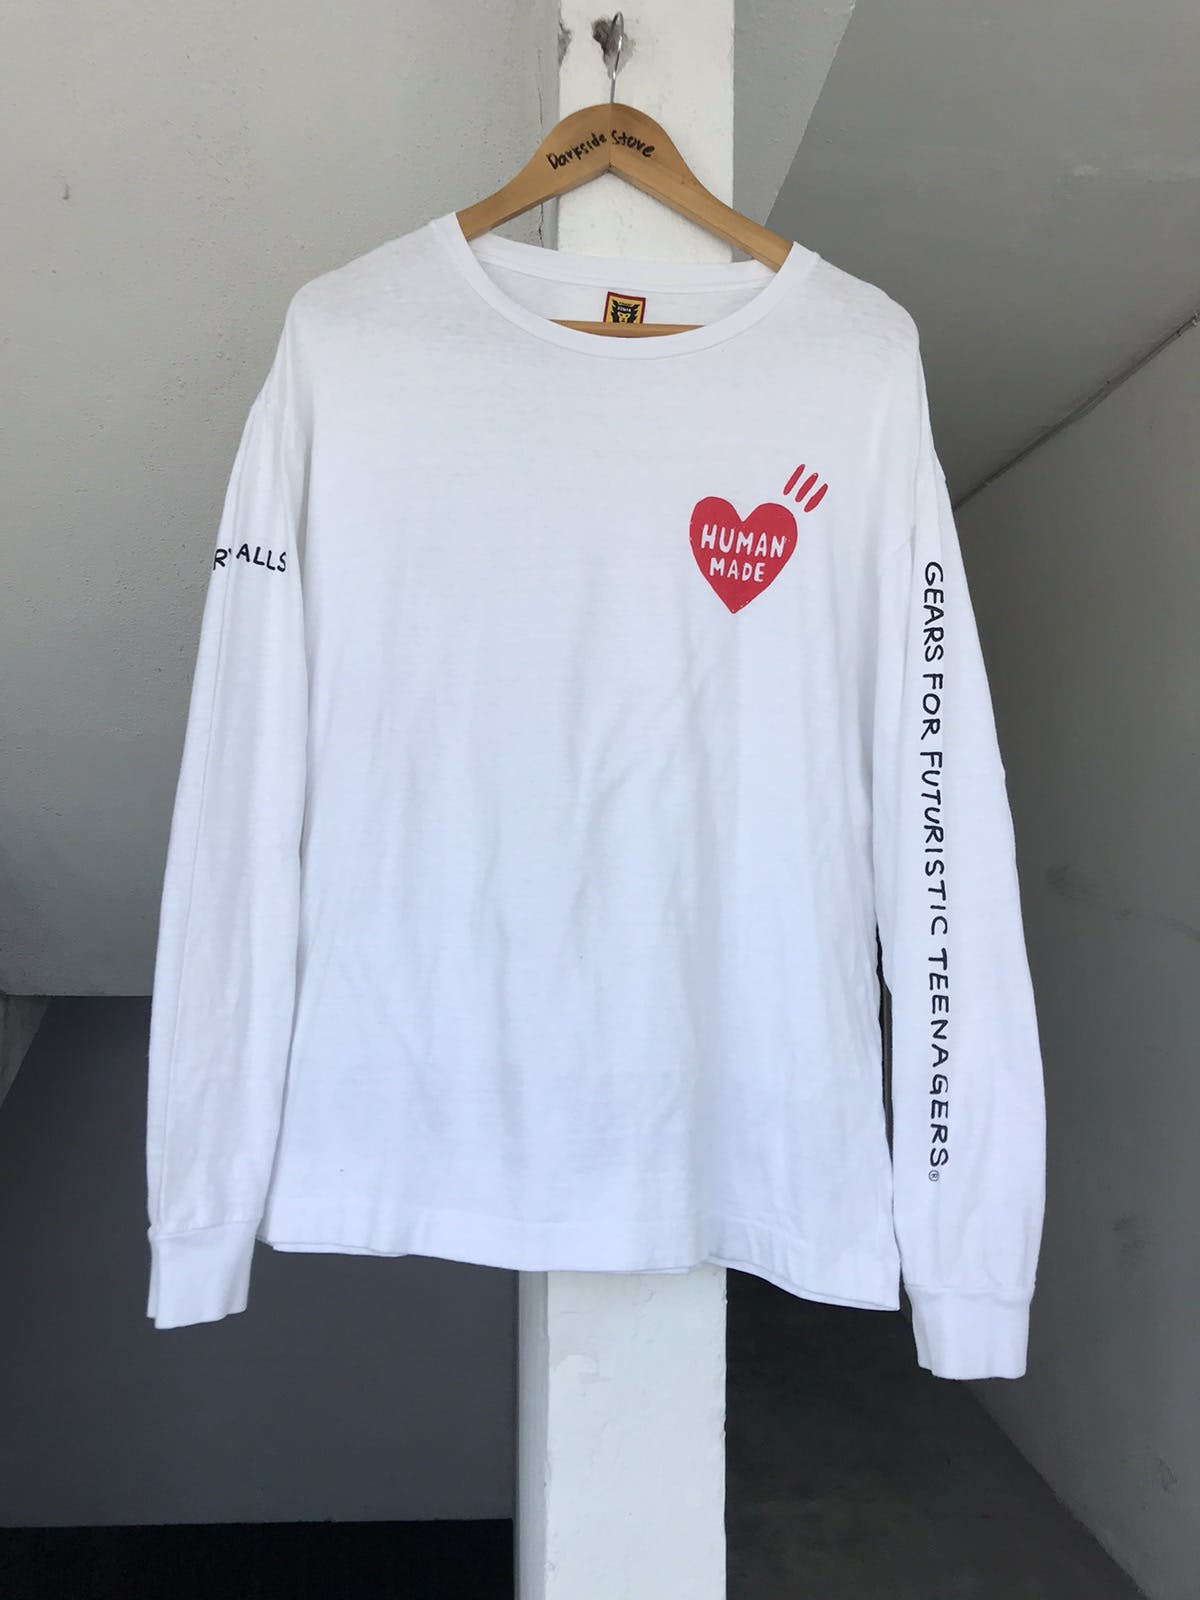 HumanMade Dry all Long Sleeve - 2